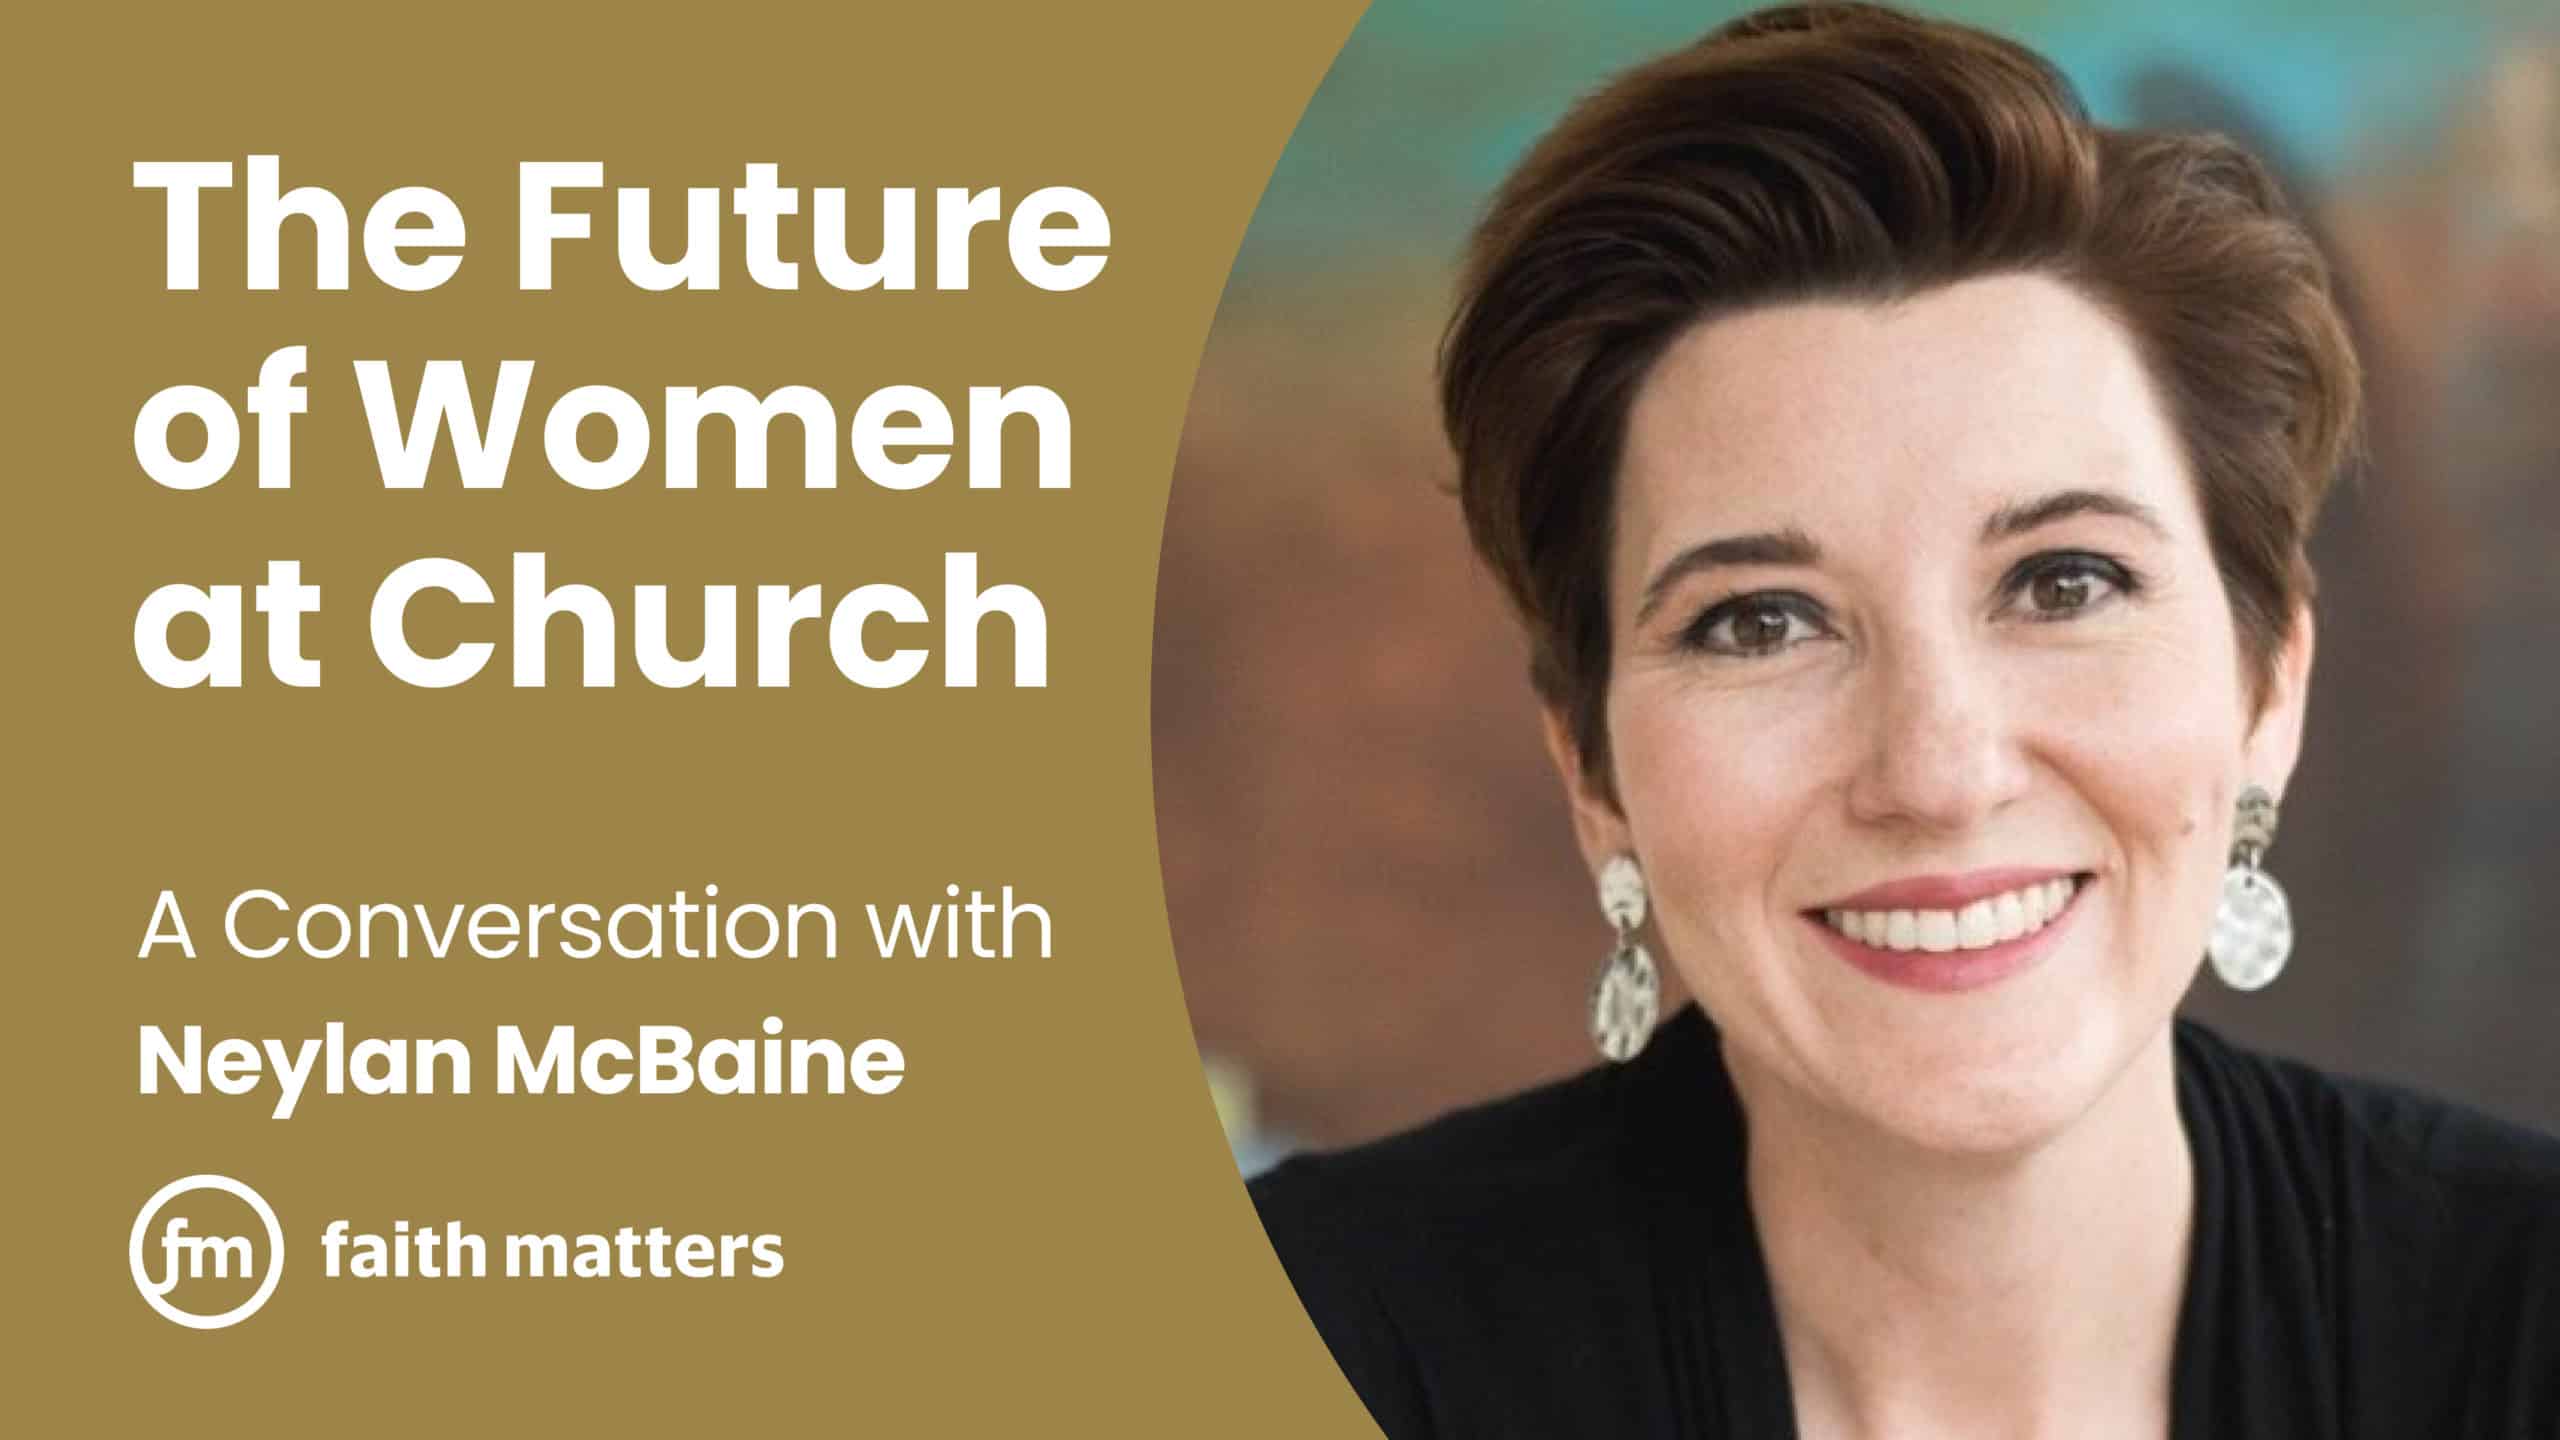 The Future of Women at Church: A Conversation with Neylan McBaine